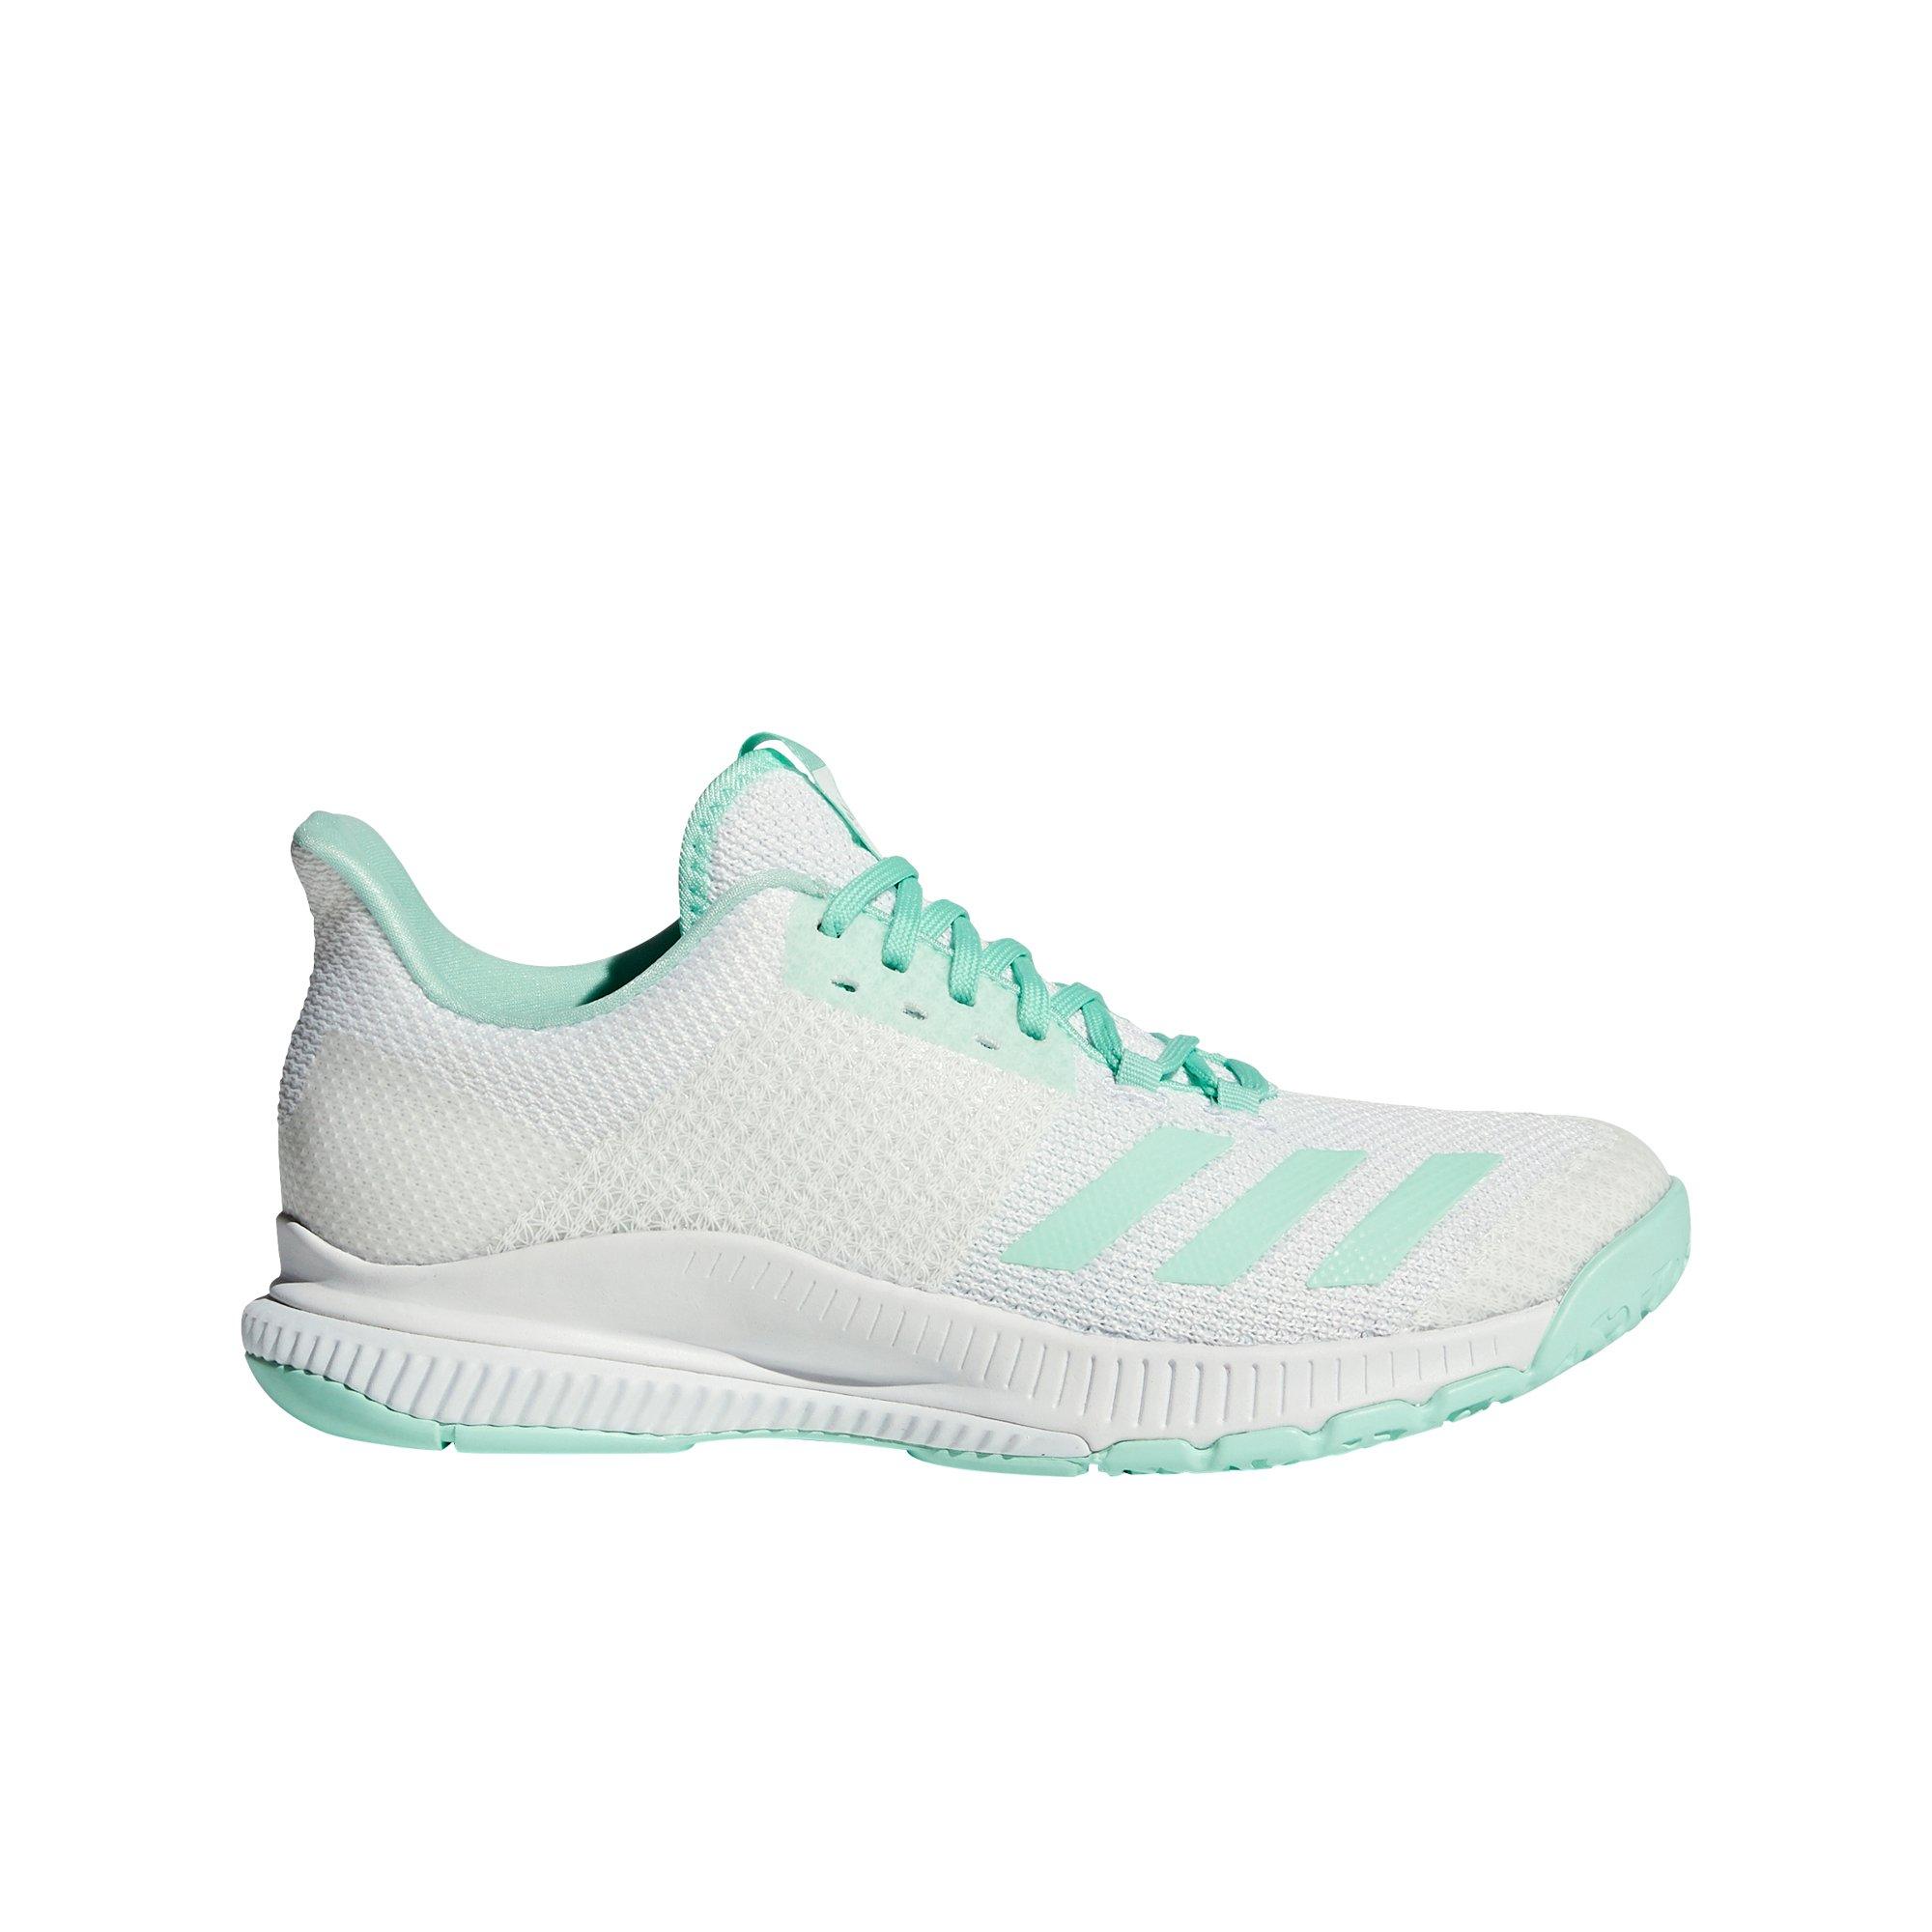 adidas crazyflight bounce 2 volleyball shoes